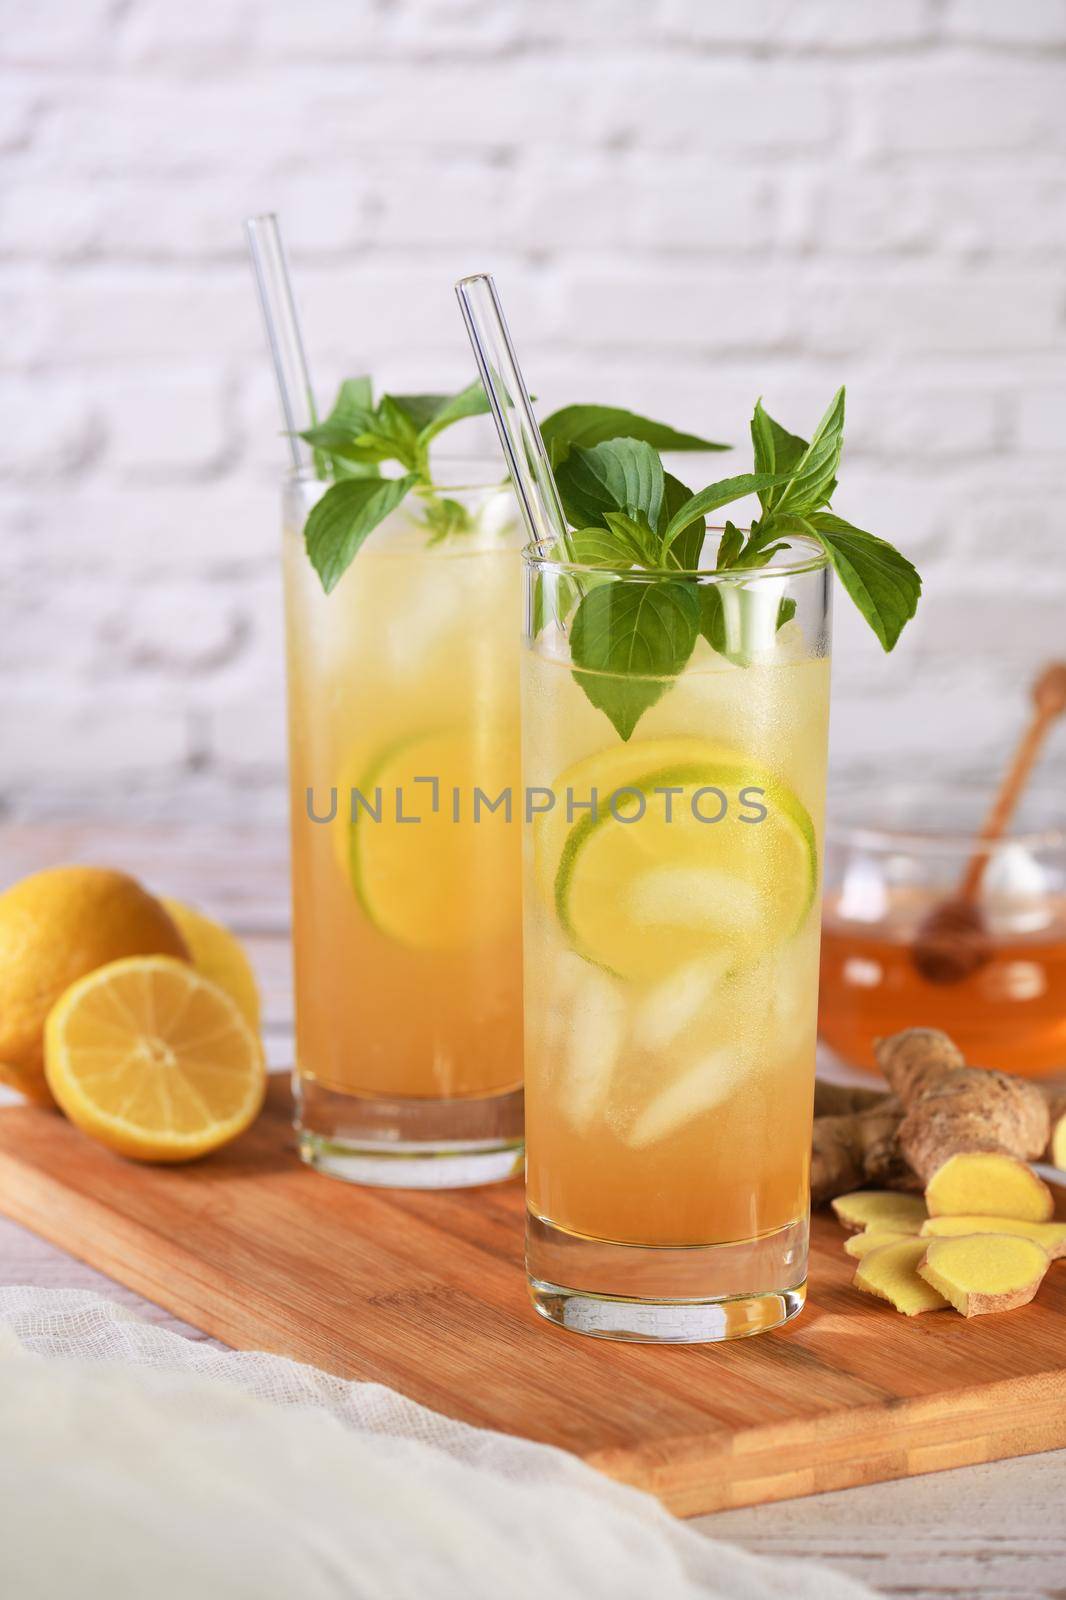 Incredible lavender lemonade. It's sweetened and flavored with homemade lavender honey syrup to make it healthier and tastier. Refreshing organic non-alcohol cocktail.